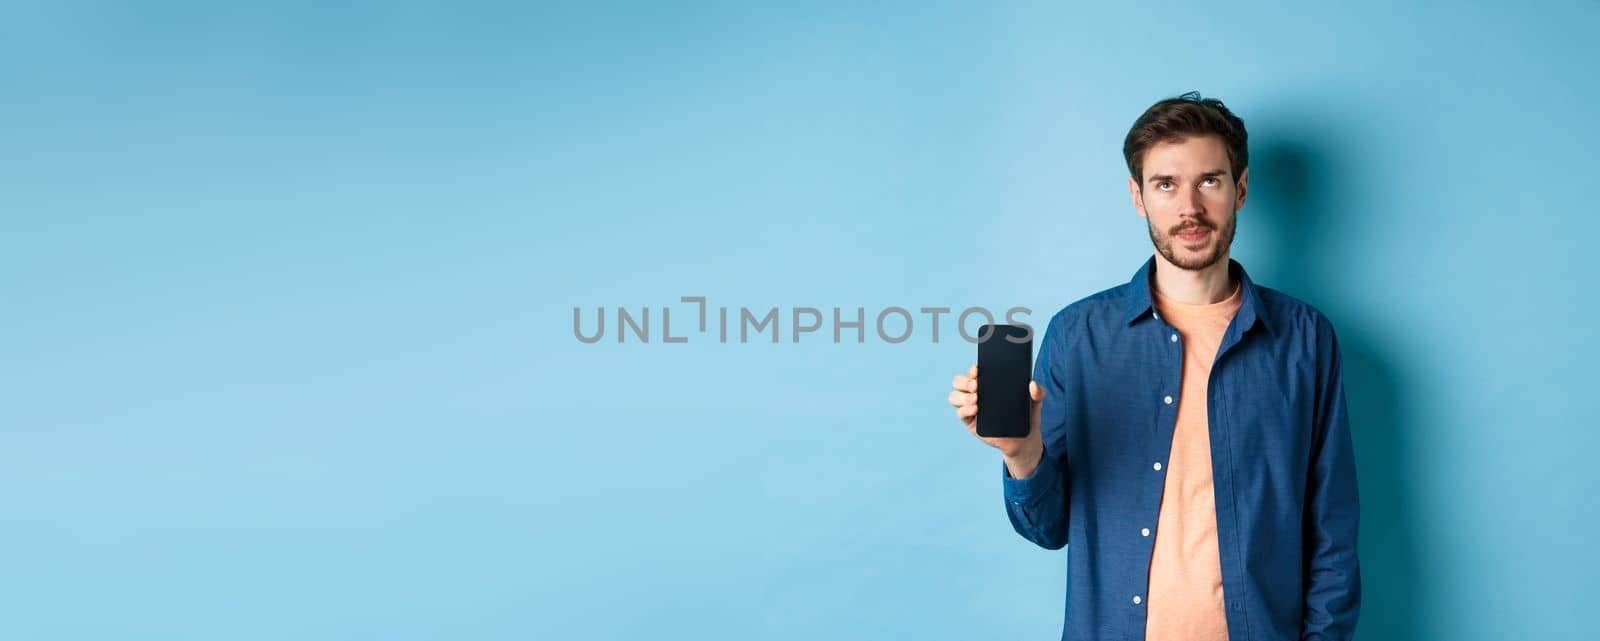 Annoyed young guy showing empty smartphone screen and roll eyes up bothered, standing on blue background.